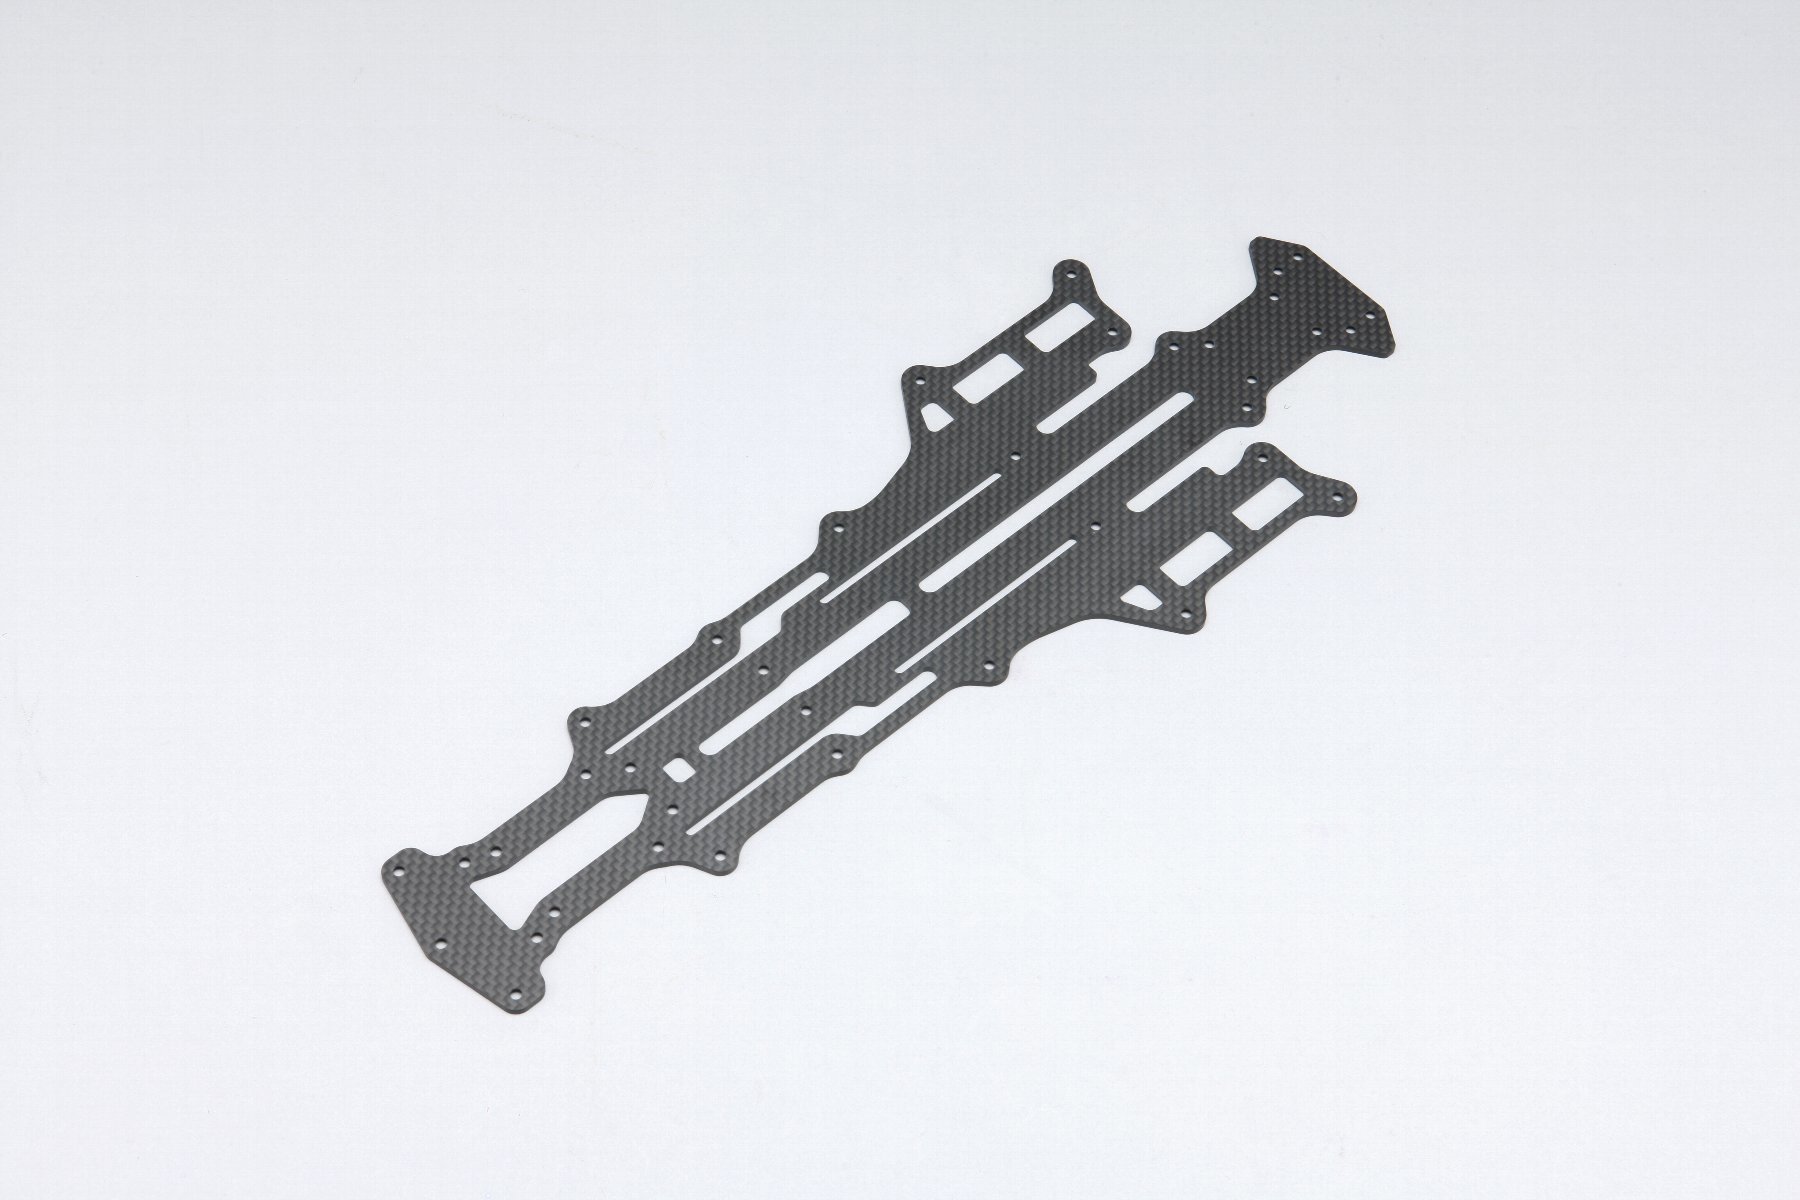 Yokomo - Y2-002ZMGA - Carbon High Traction Main Chassis for YD-2R 